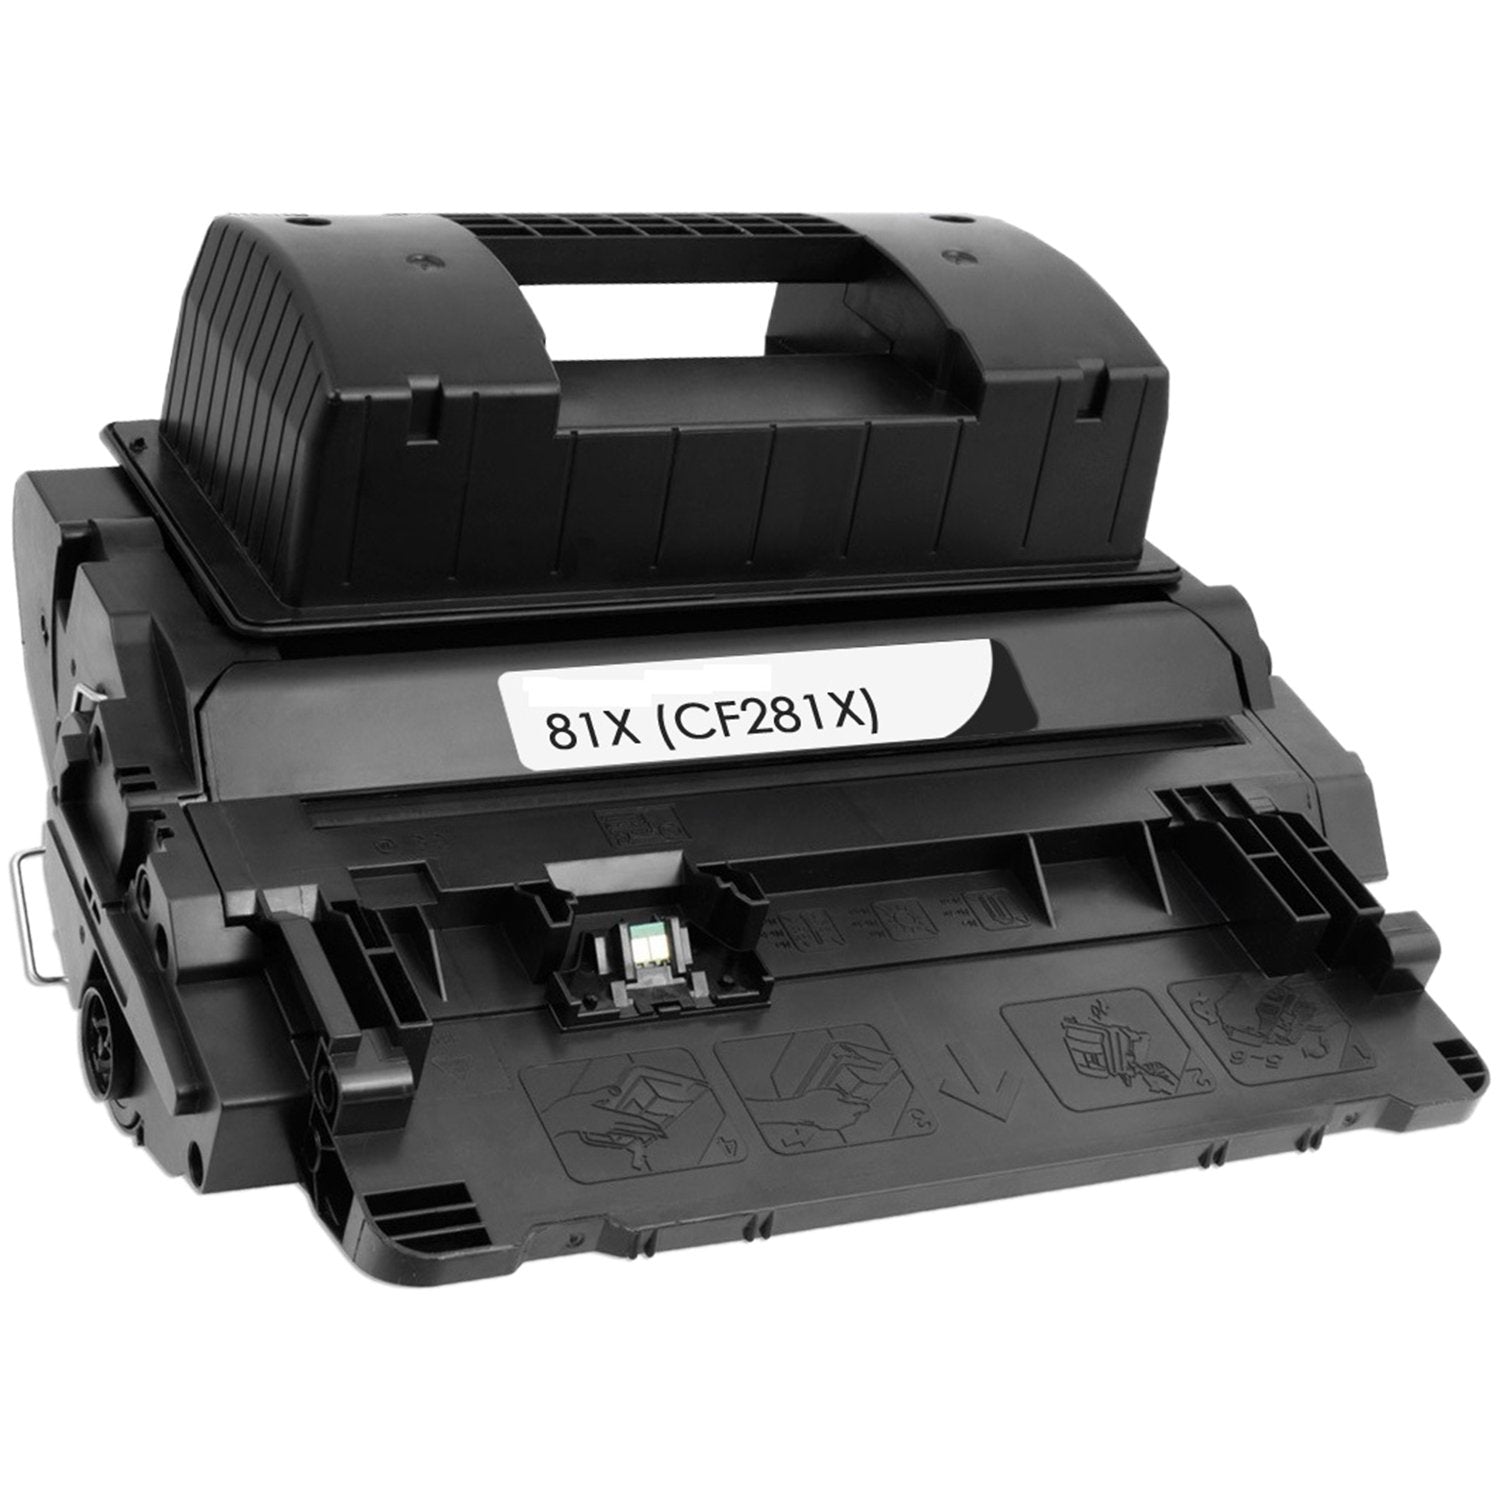 Absolute Toner Compatible CF281X HP 81X High Yield Black Toner Cartridge | Absolute Toner HP Toner Cartridges